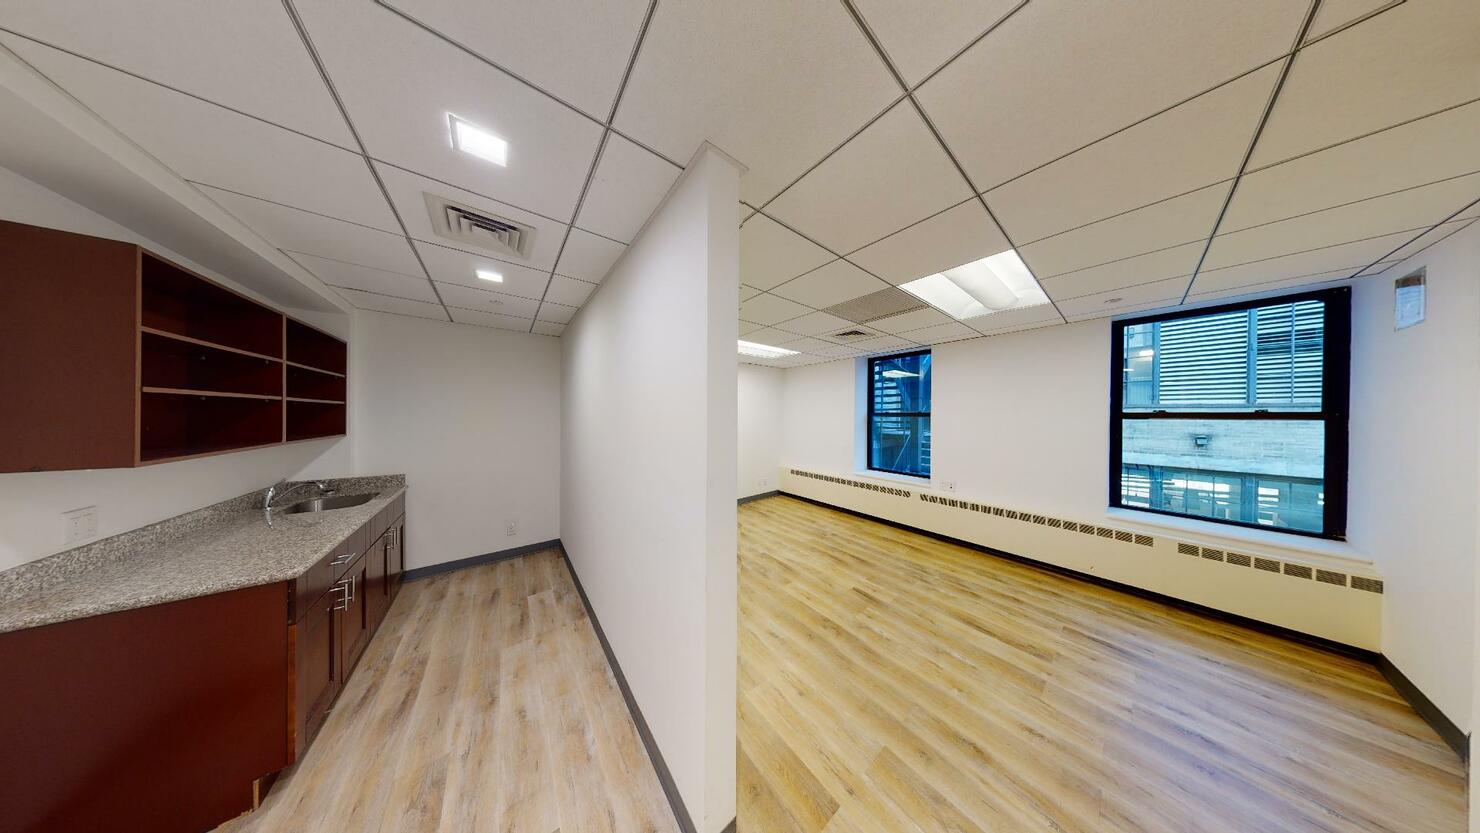 483 Tenth Avenue Office Space - Kitchenette and Office Room